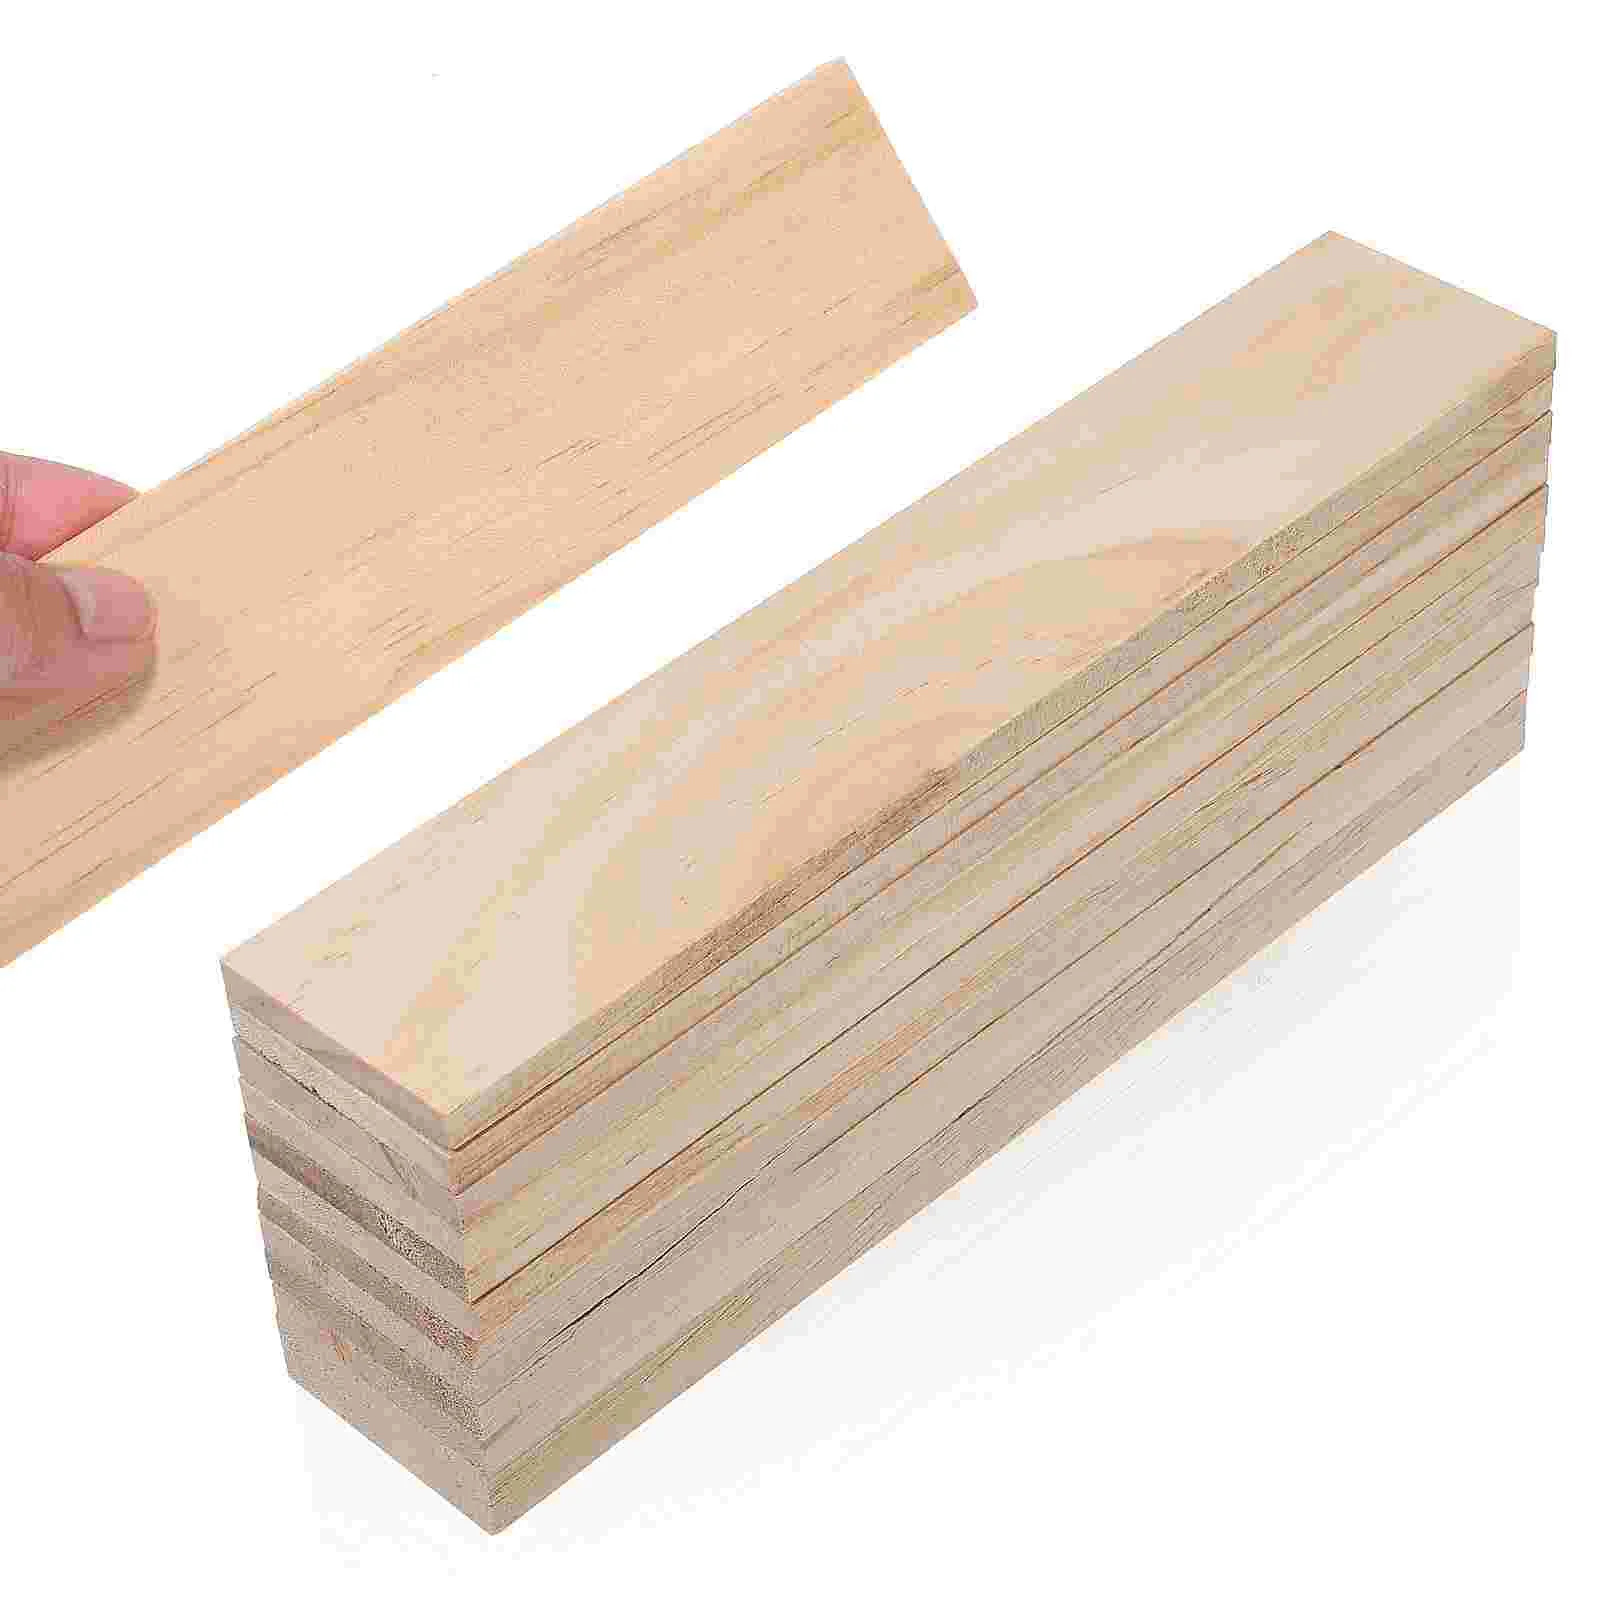 

12 Pcs Wood Board Craft Bulk Wooden Carving Crafts Unfinished Blocks Boards Shelves Small Rectangle